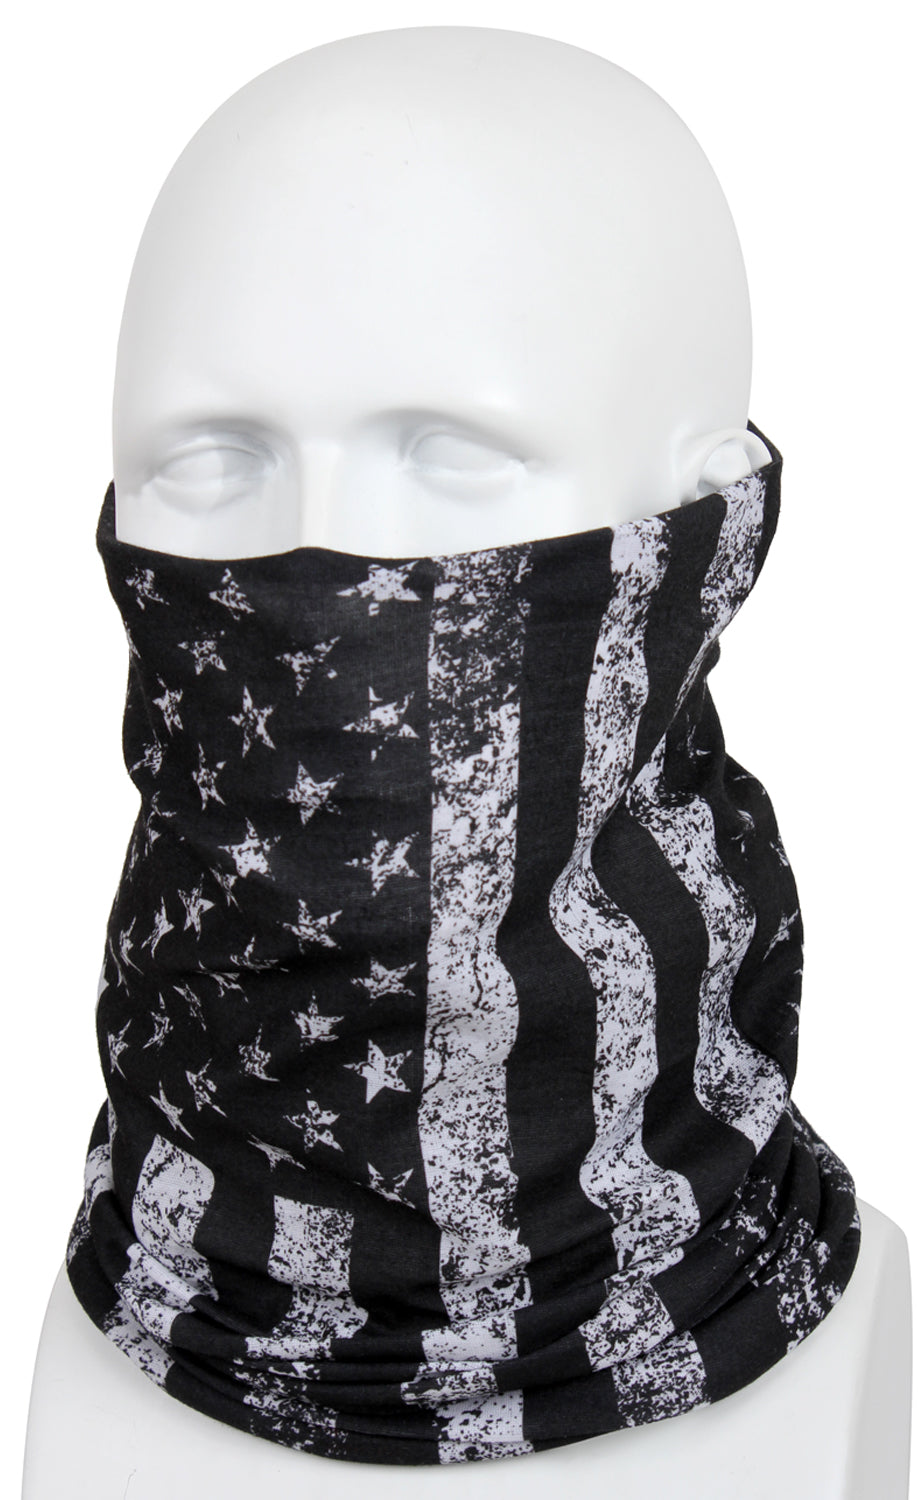 Motorcycle Riding U.S. Flag Multi-Use Tactical Wrap by Rothco